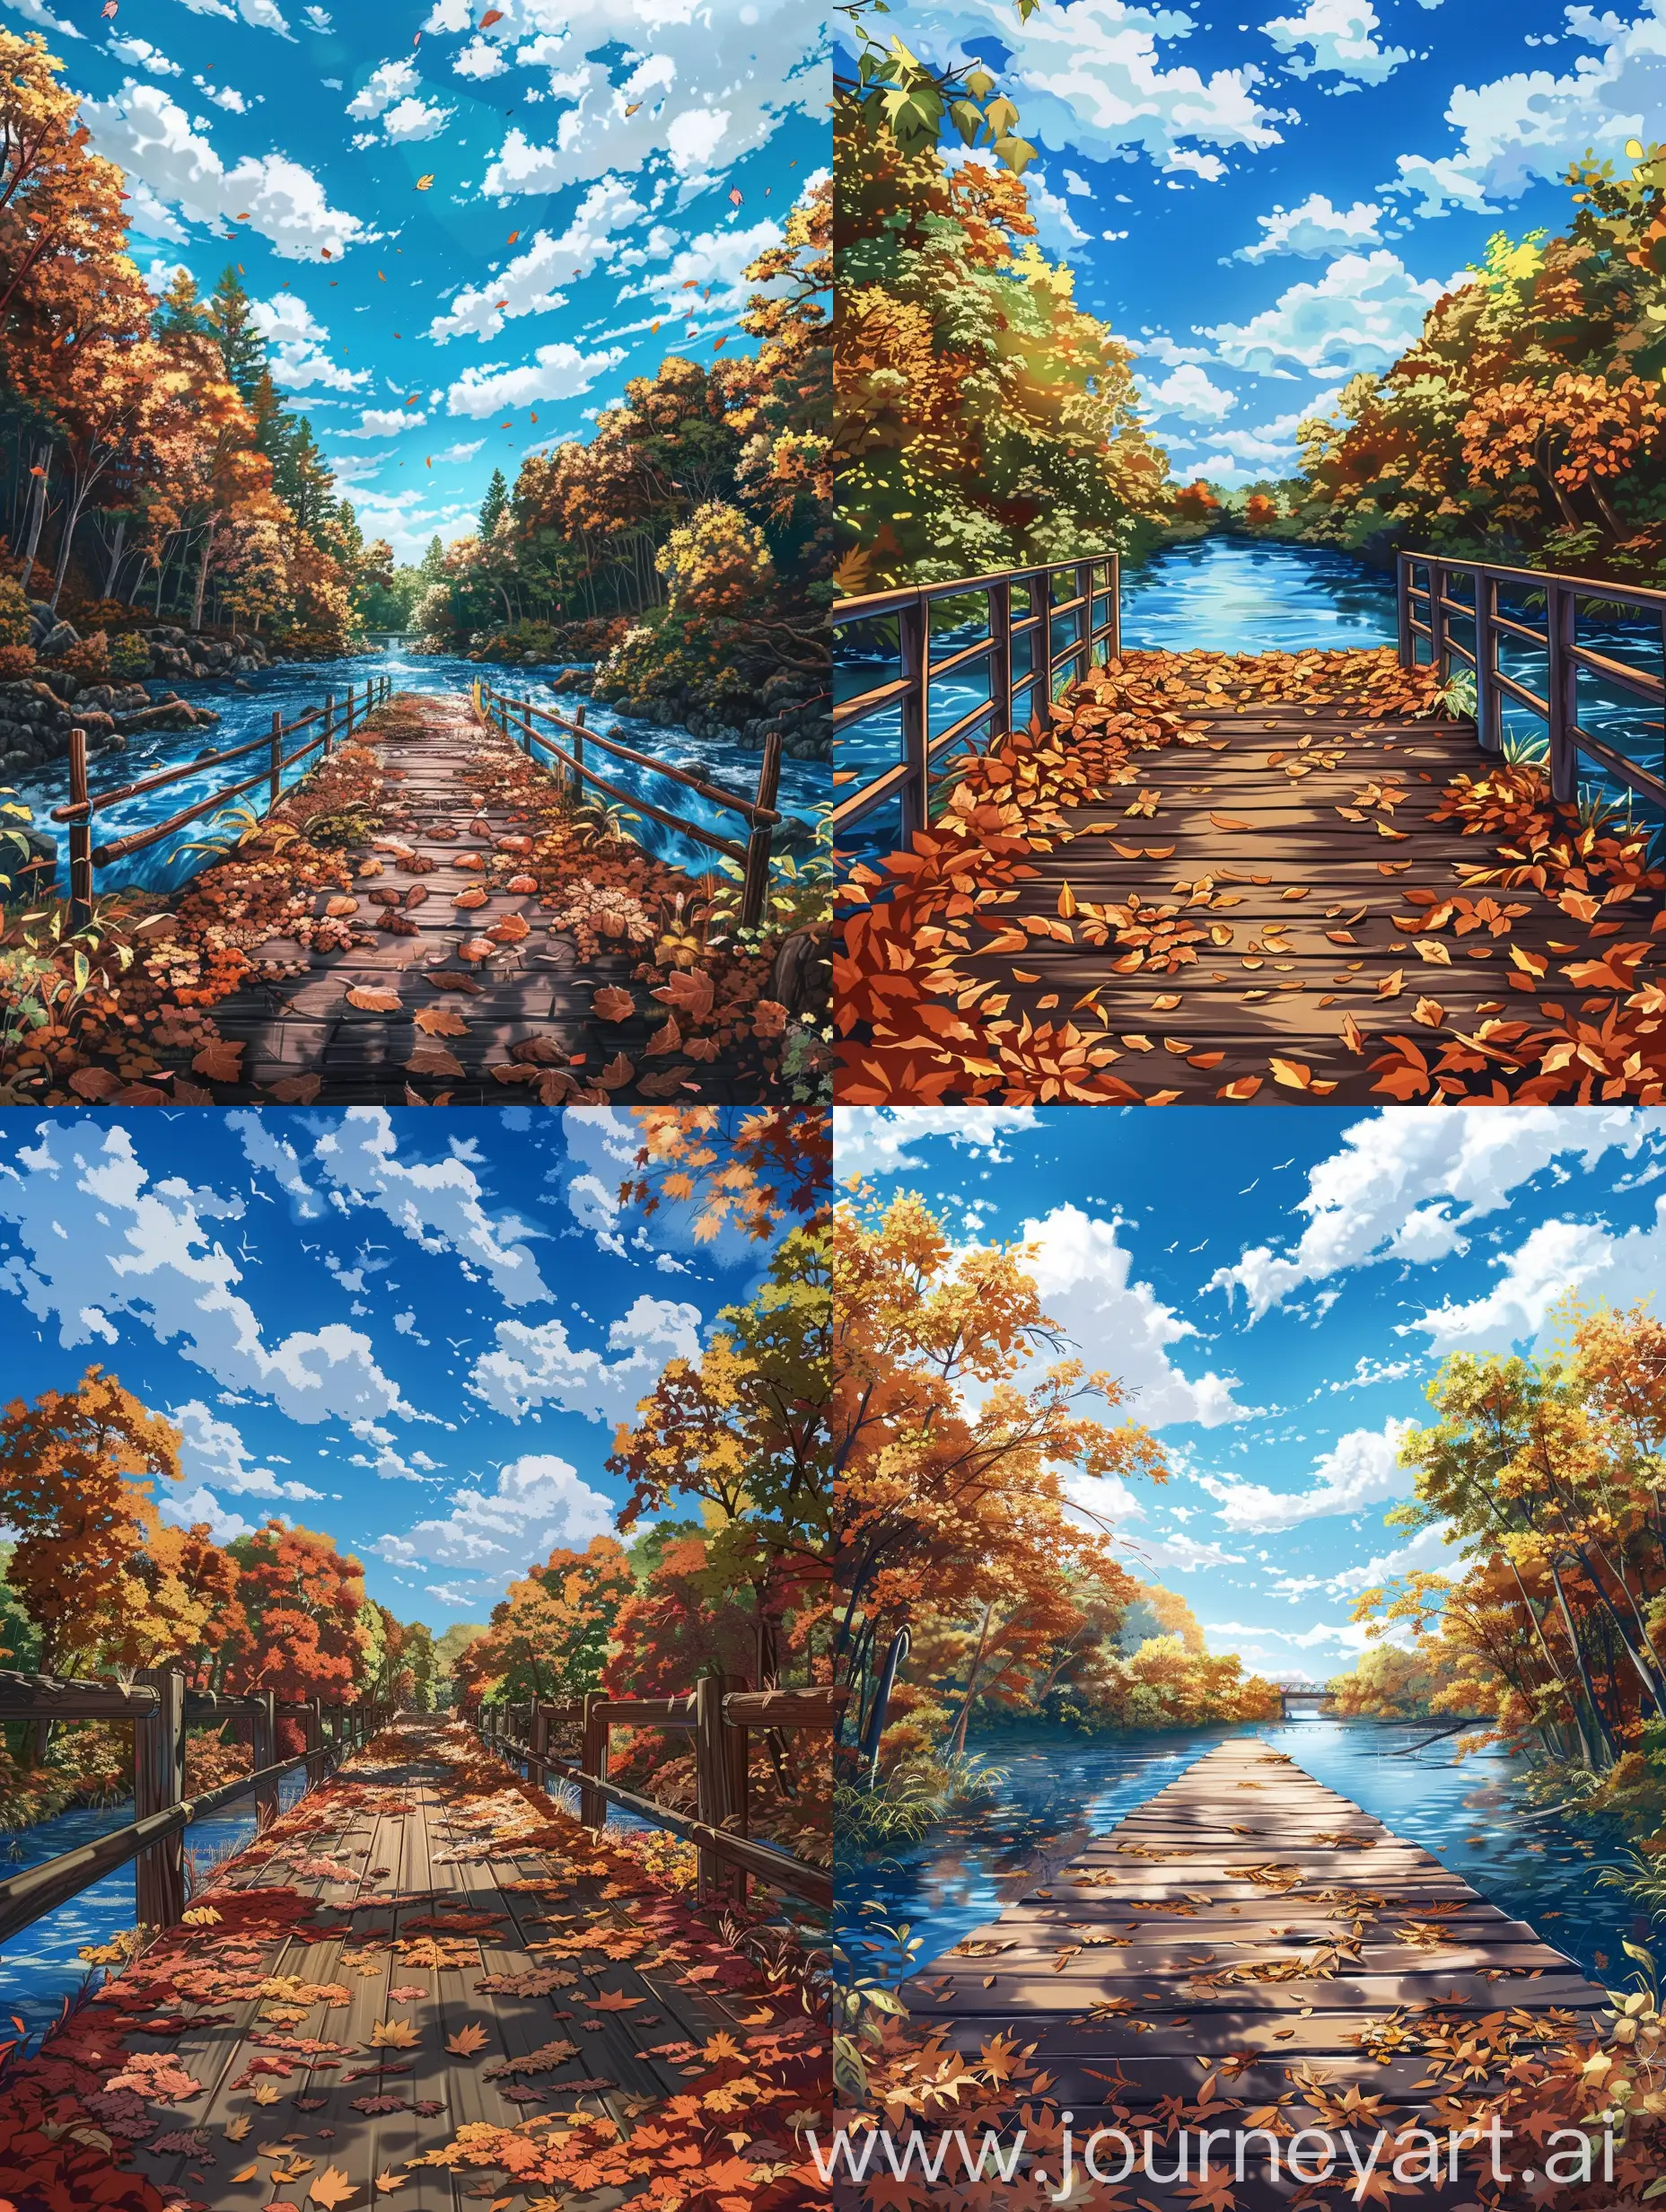 Autumn-Forest-Wooden-Bridge-Crossing-over-River-with-Fallen-Leaves-in-Anime-Style